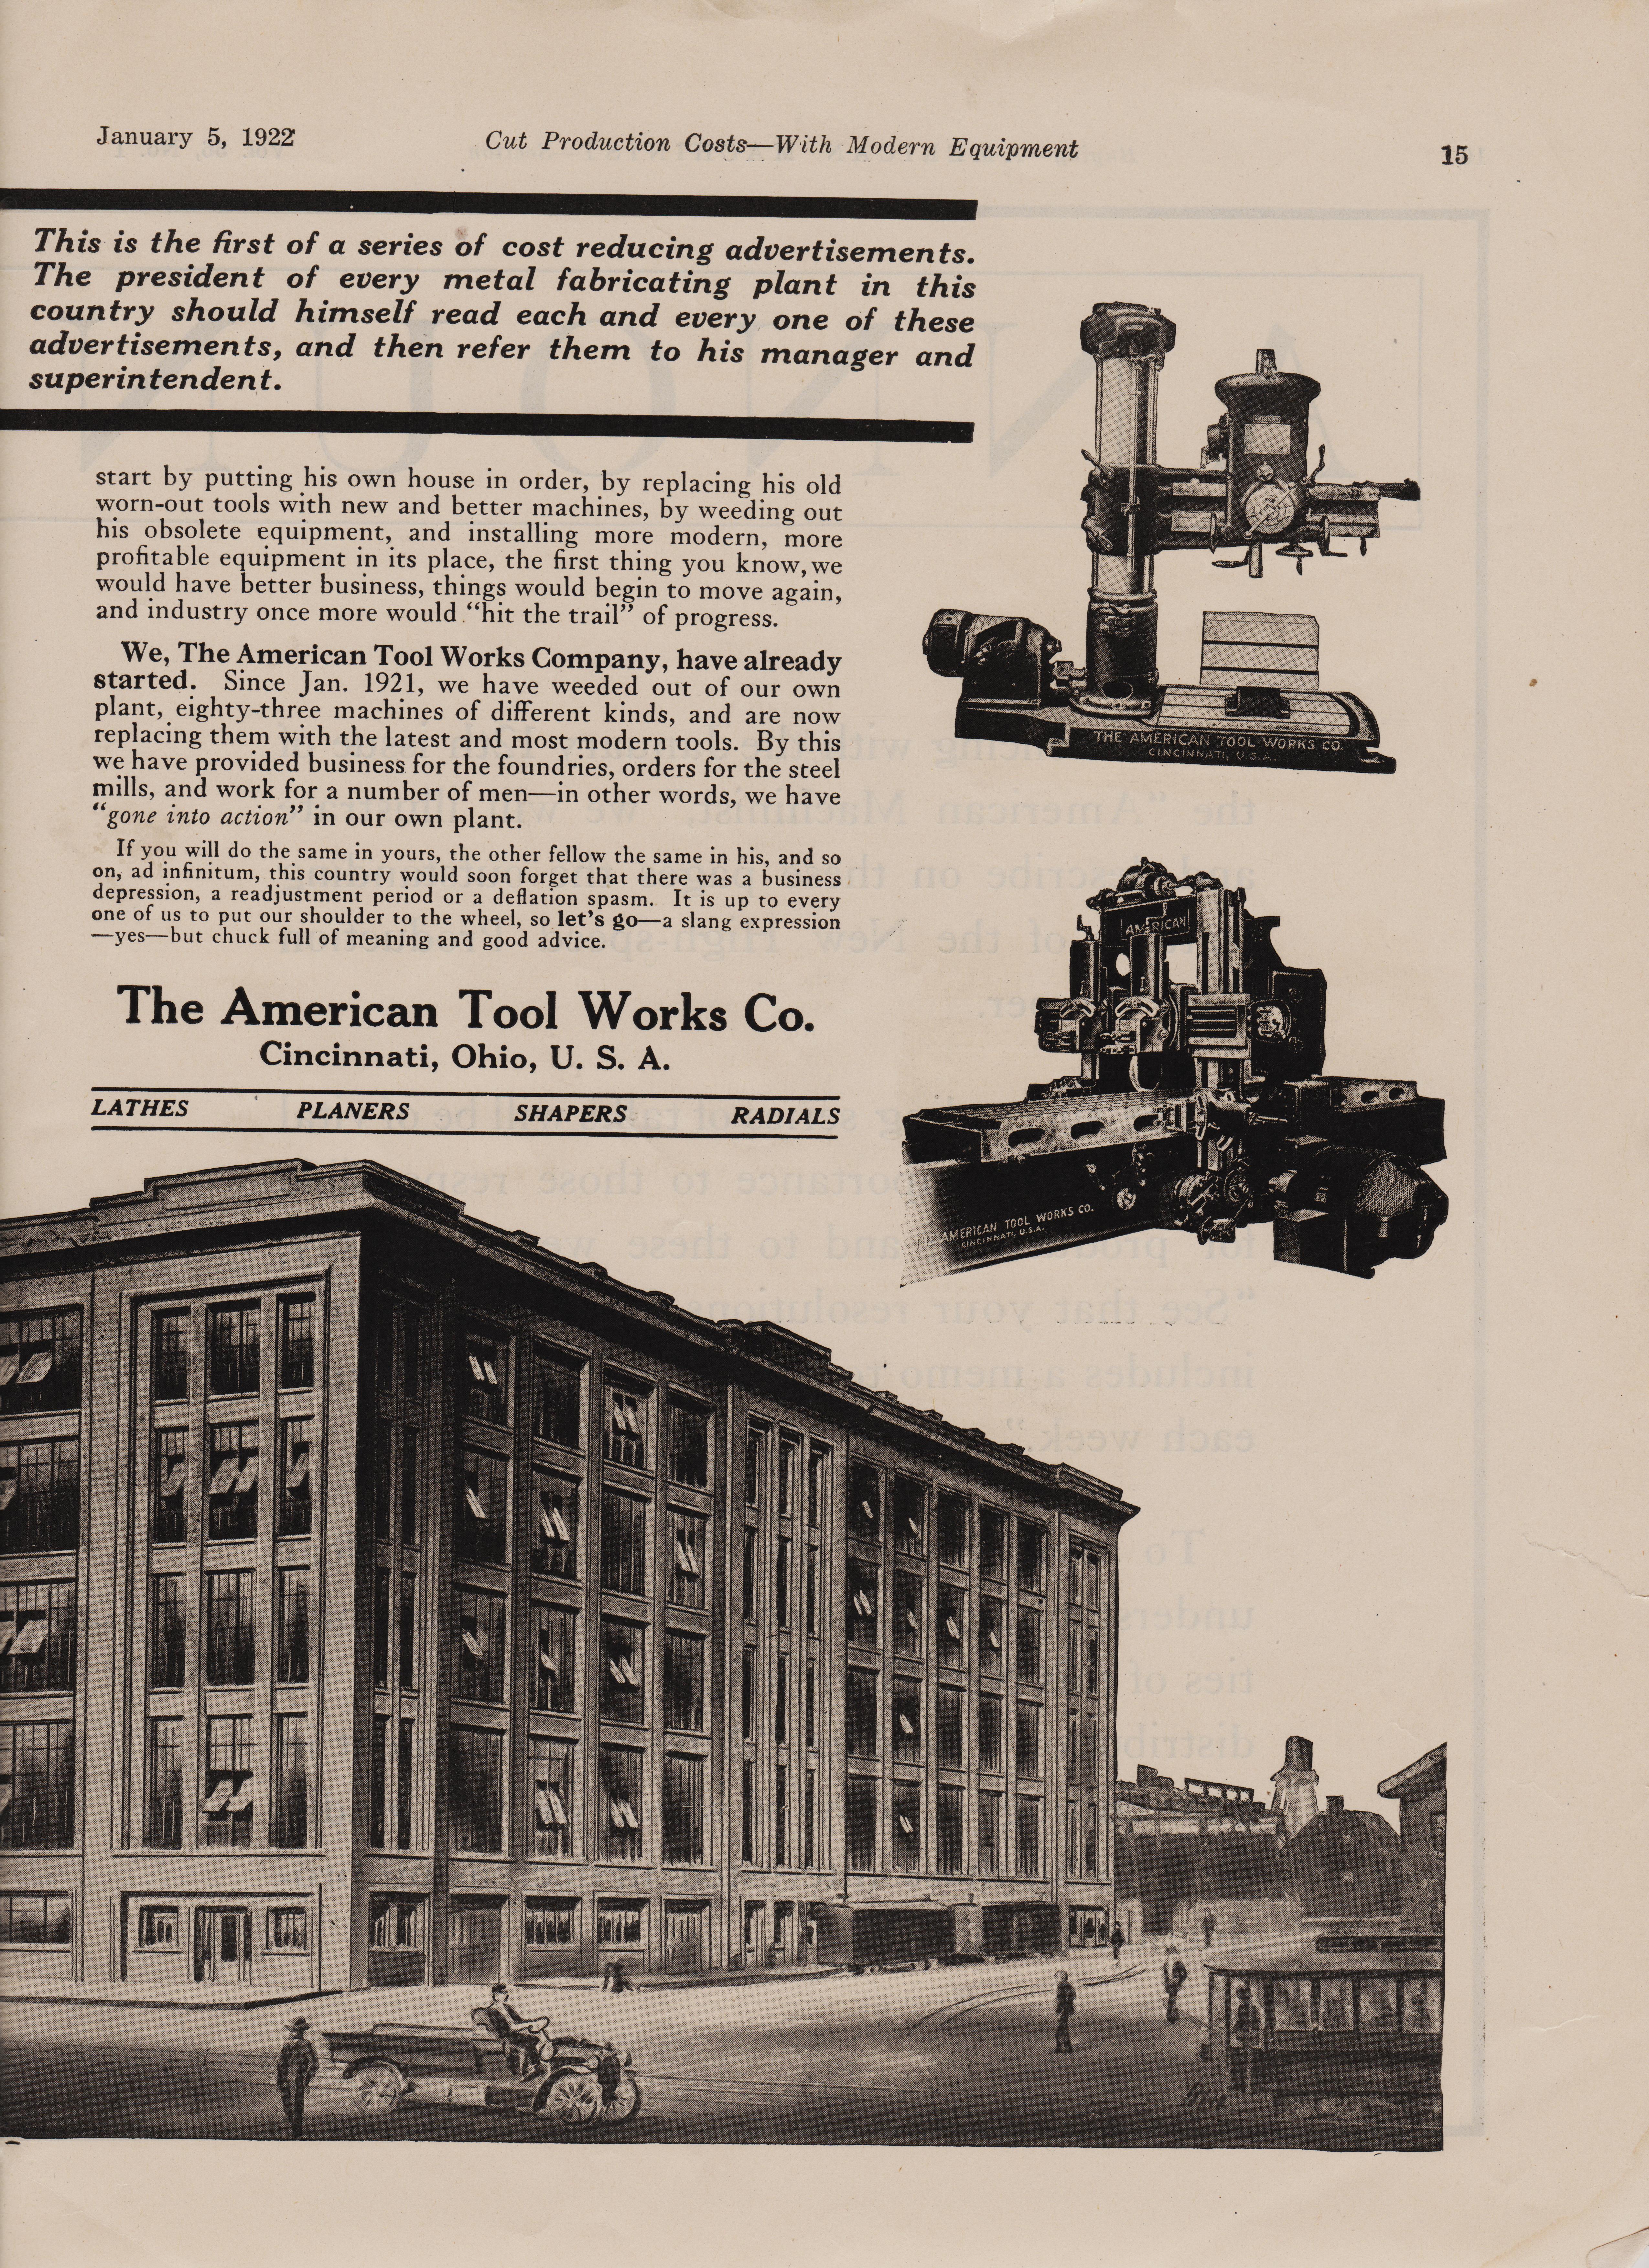 http://antiquemachinery.com/images-2019/American-Machinist-January-5-1922-pg15-American-Tool_Works-Co-Lathes-Planers-Shapers-Radials-right-page.jpeg